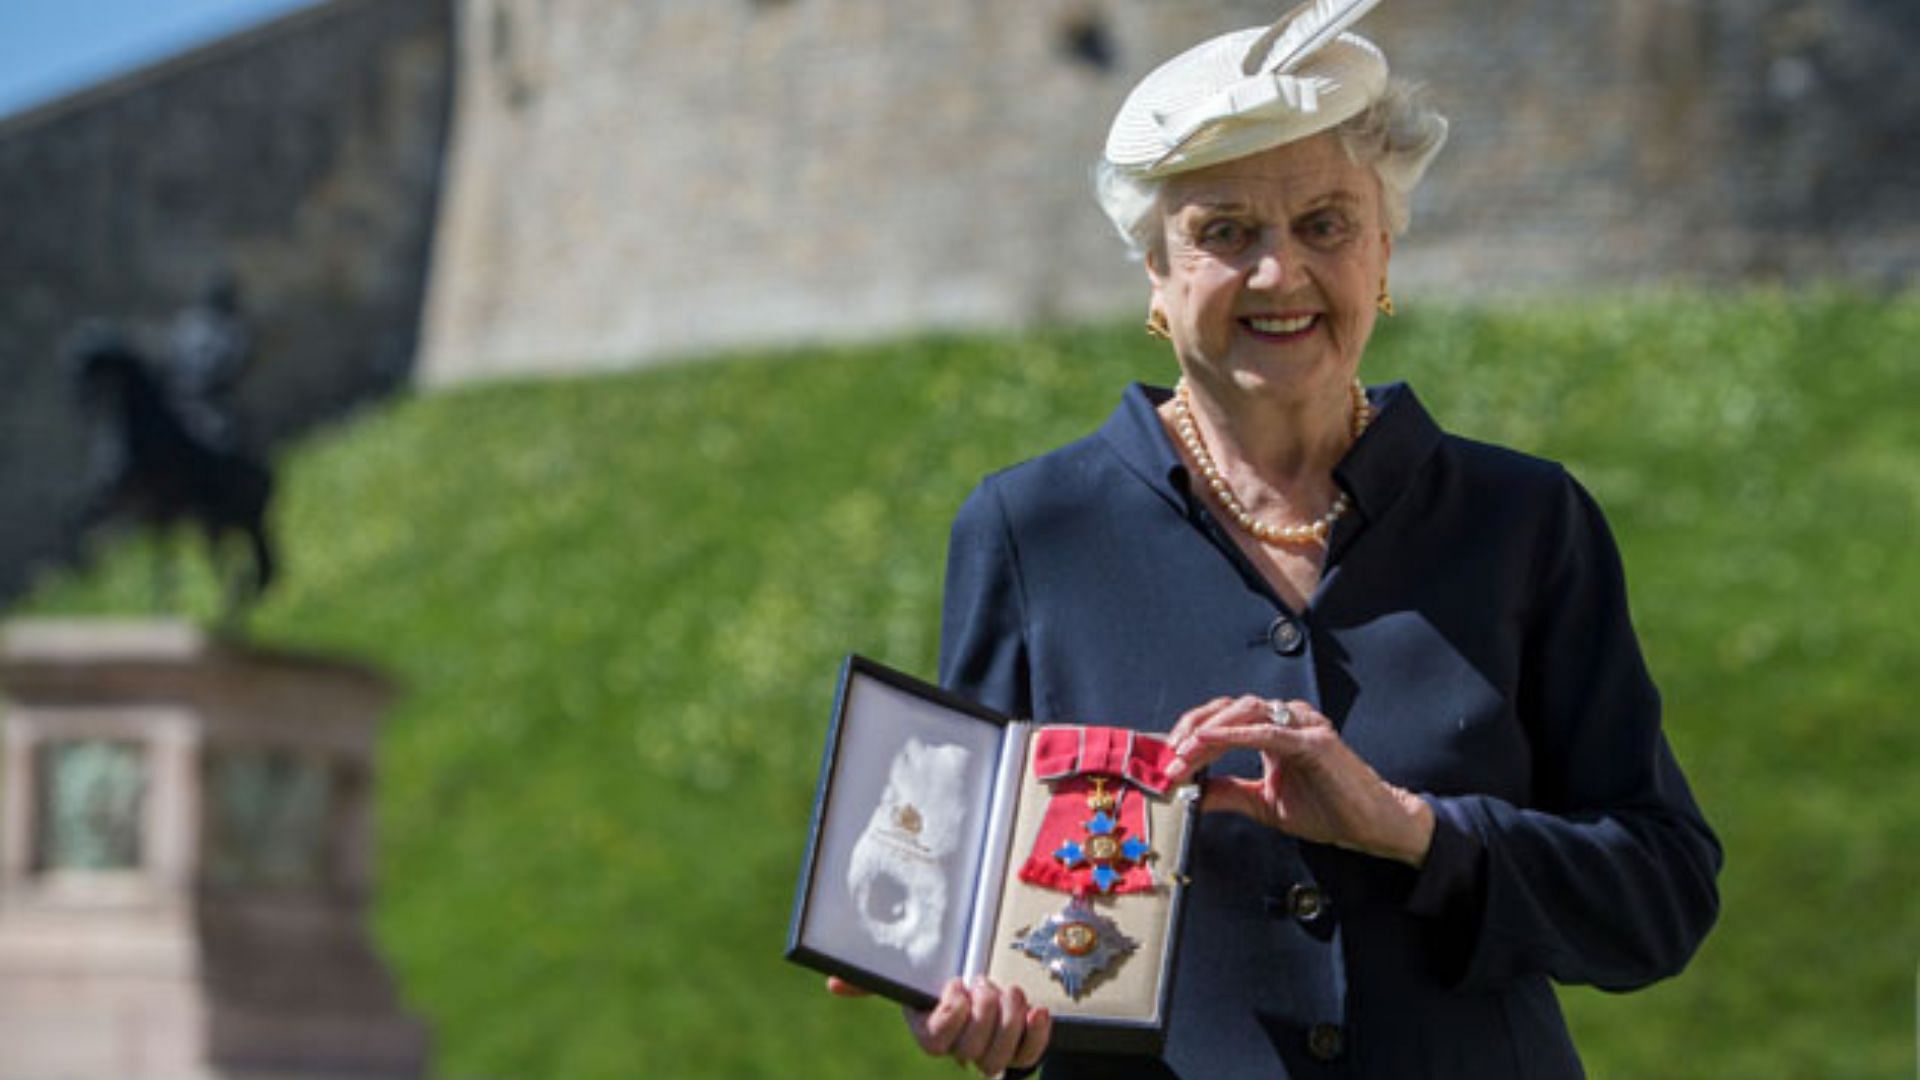 Angela Lansbury after receiving her Dame Commander of the Order of the British Empire (DBE) in 2014 (Image via Getty)